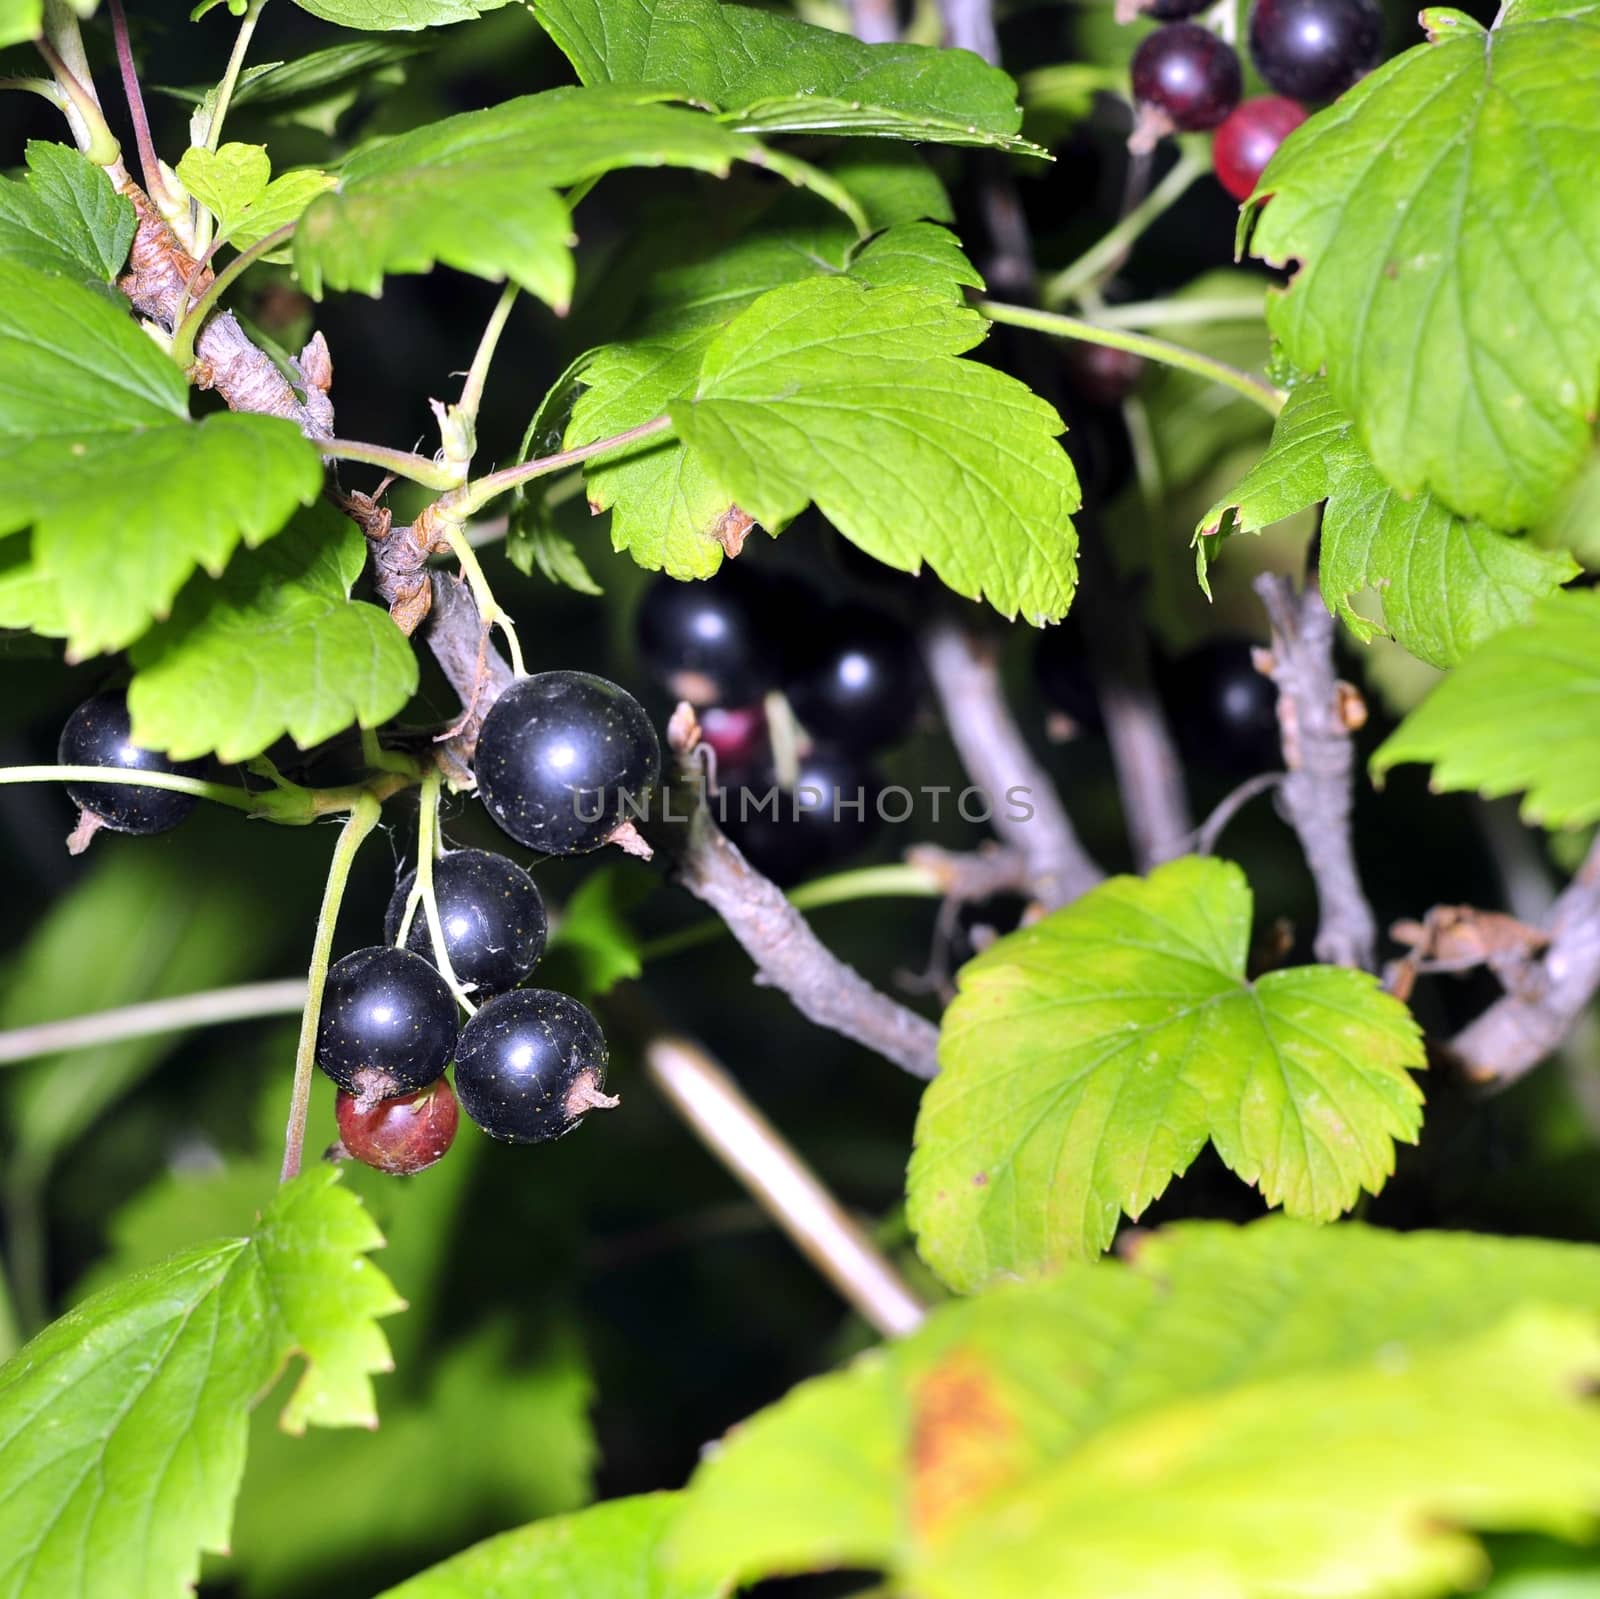 black currant on a branch among green leaves